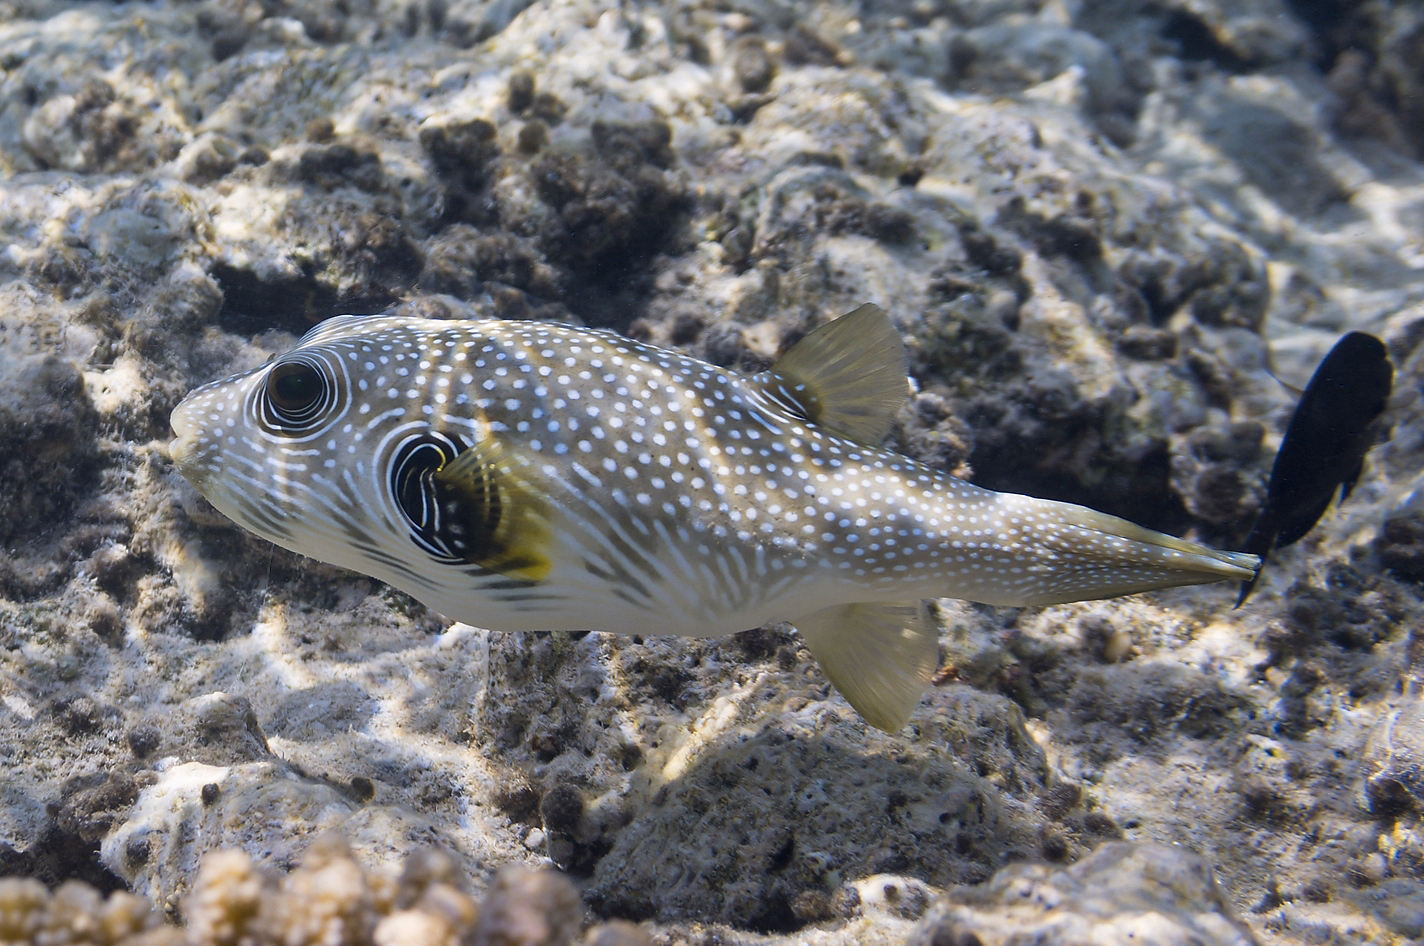 image of Arothron hispidus (White-spotted puffer)